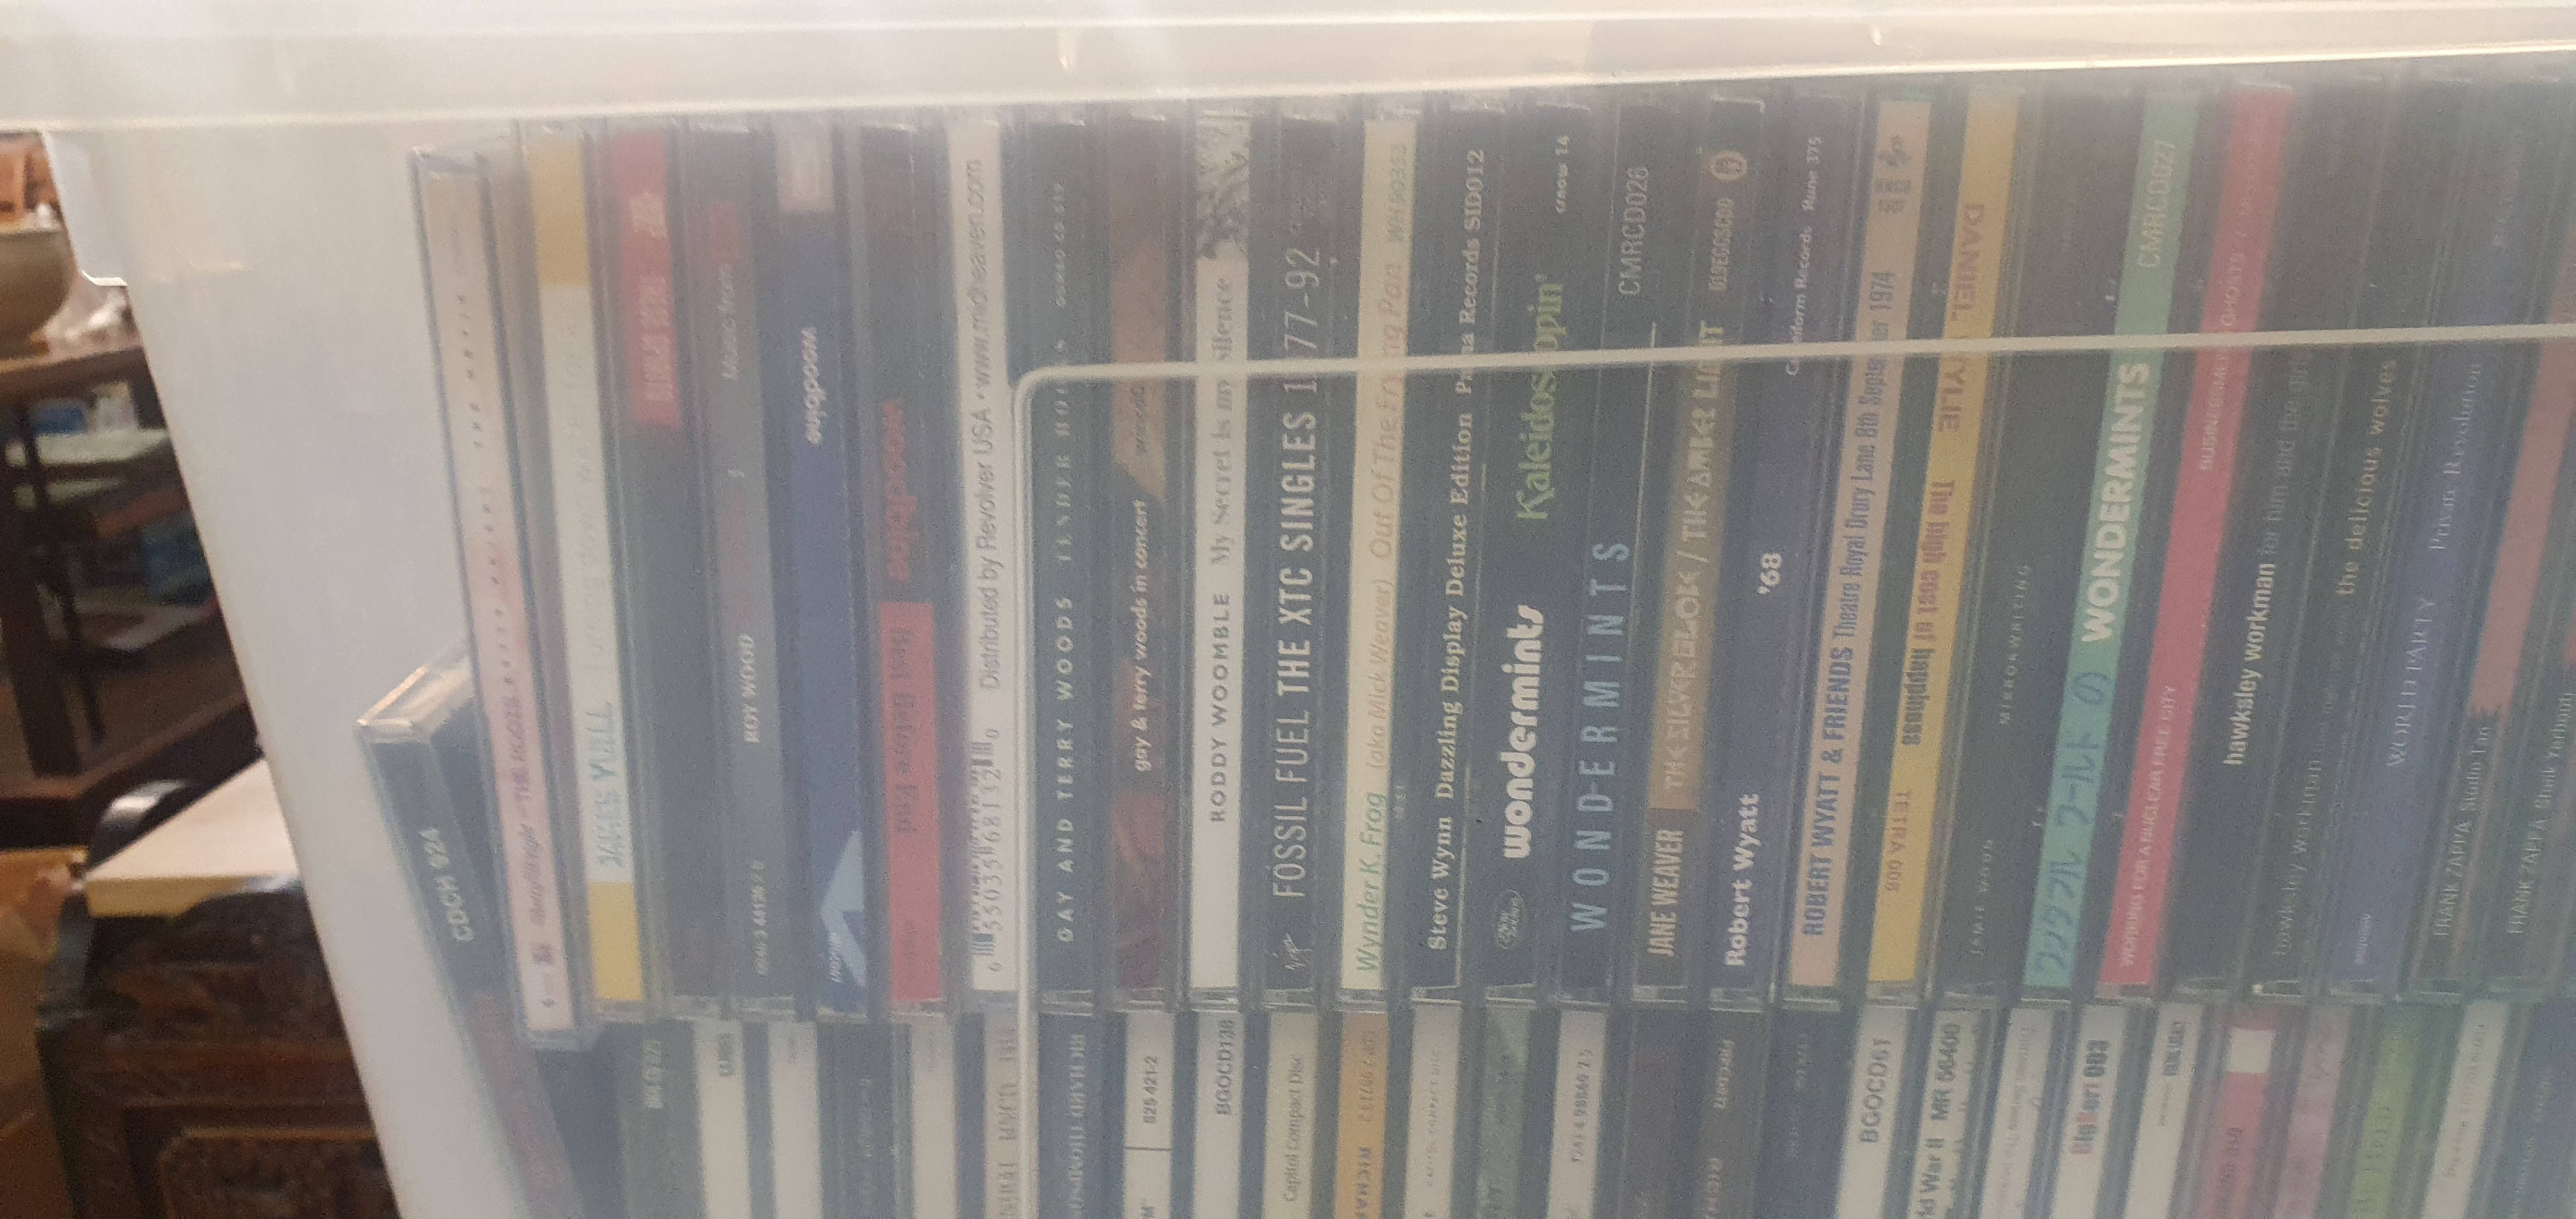 LARGE COLLECTION OF APPROXIMATELY 200 MUSIC CD'S - Image 6 of 9